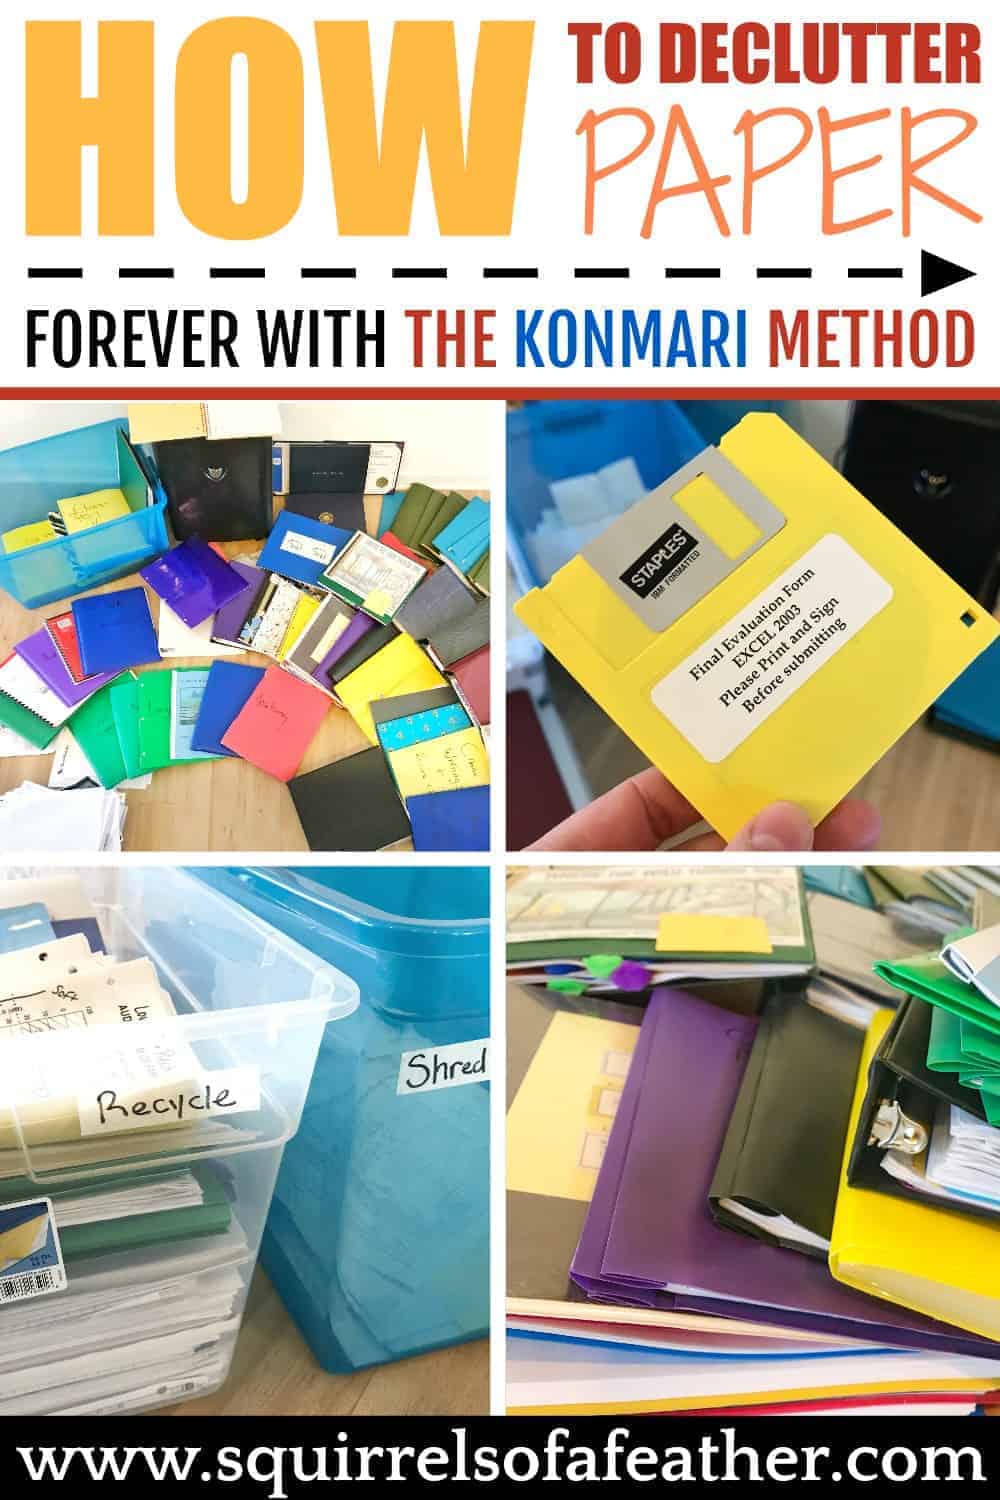 Stages of decluttering paper with the KonMari method